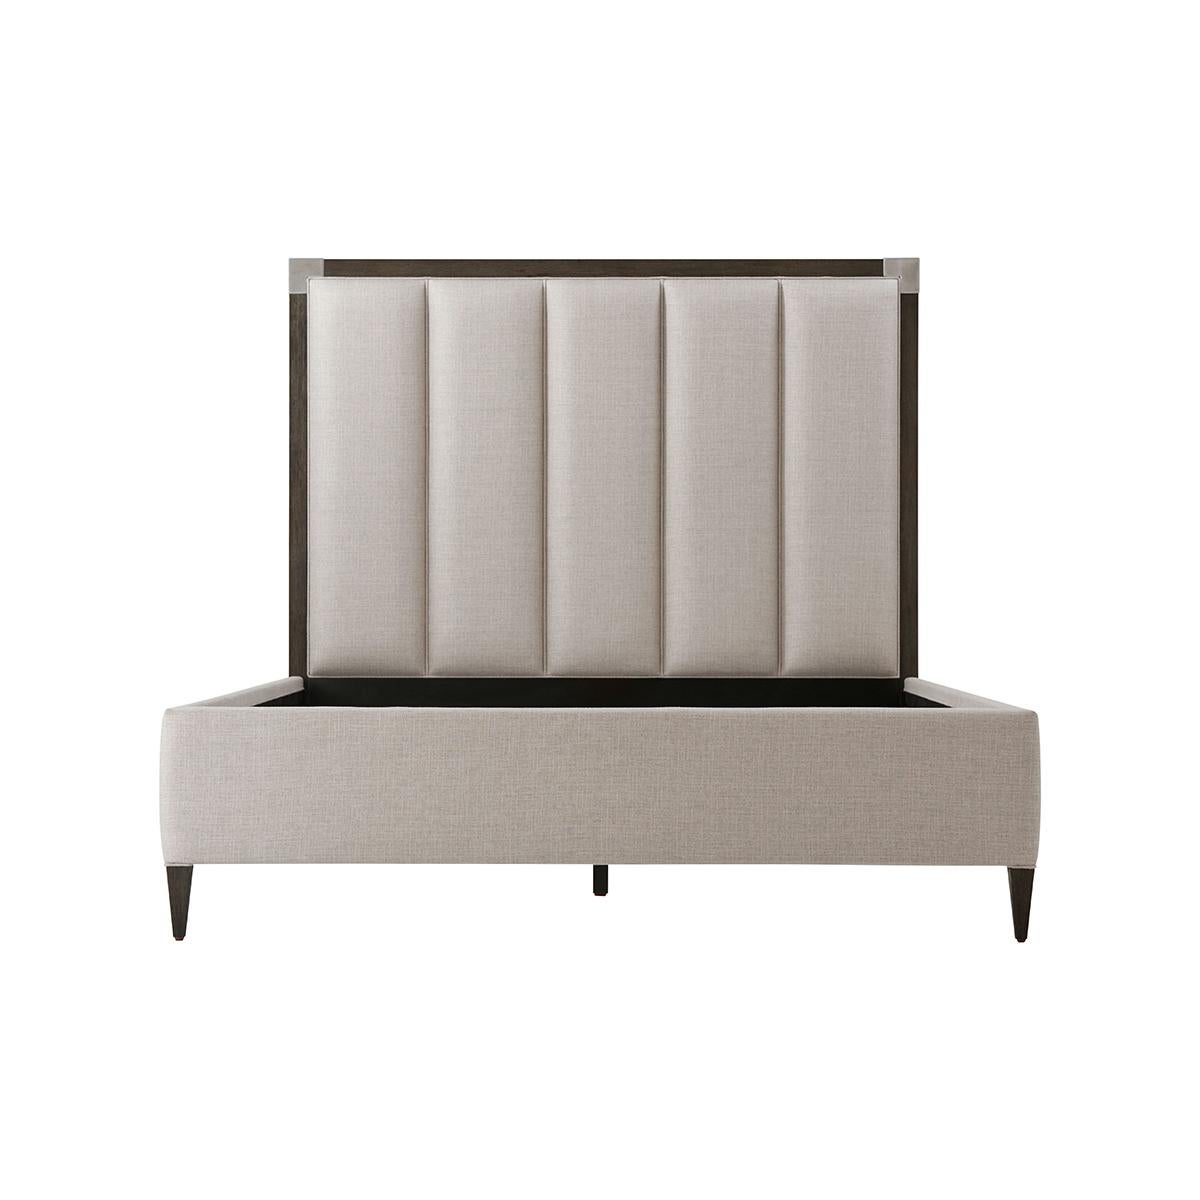 Art Deco Style Queen size bed with our Anise finish frame and brushed Nickel finish corner mounts with a vertically channeled upholstered headboard, upholstered rails and raised on tapered legs.


Dimensions: 64.25